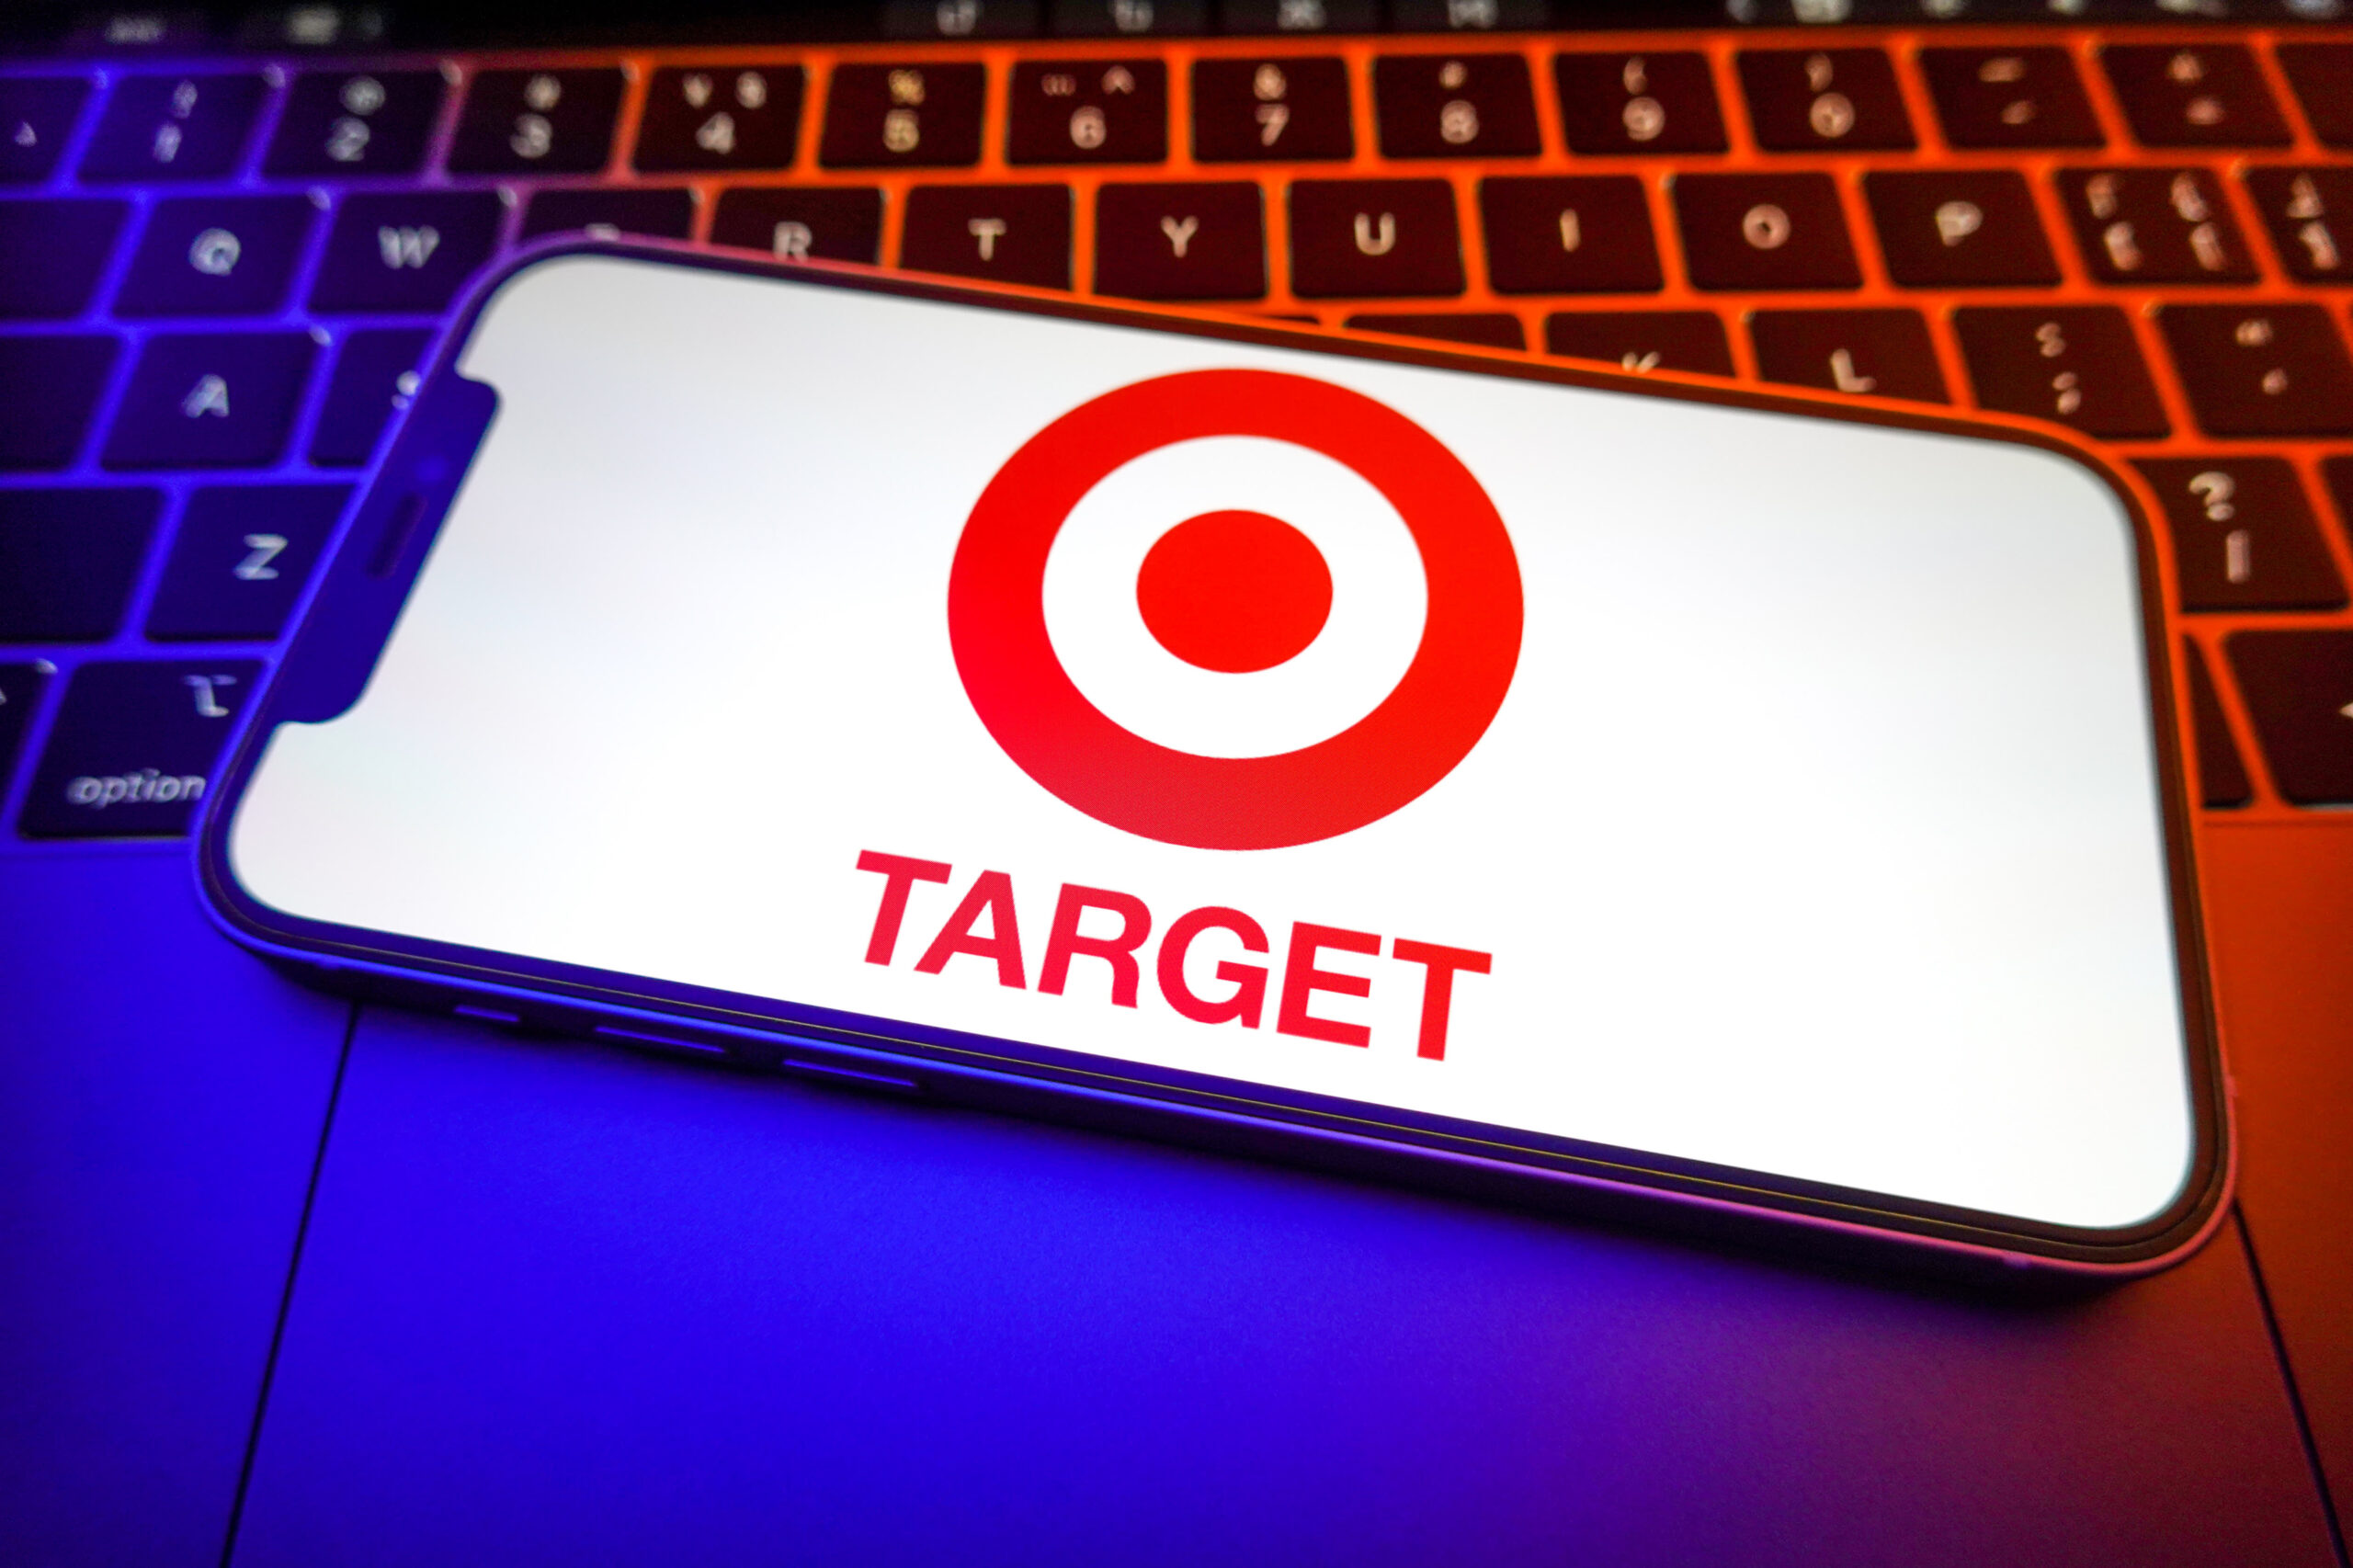 Target aims to offer next-day delivery to customers who live outside of urban areas.